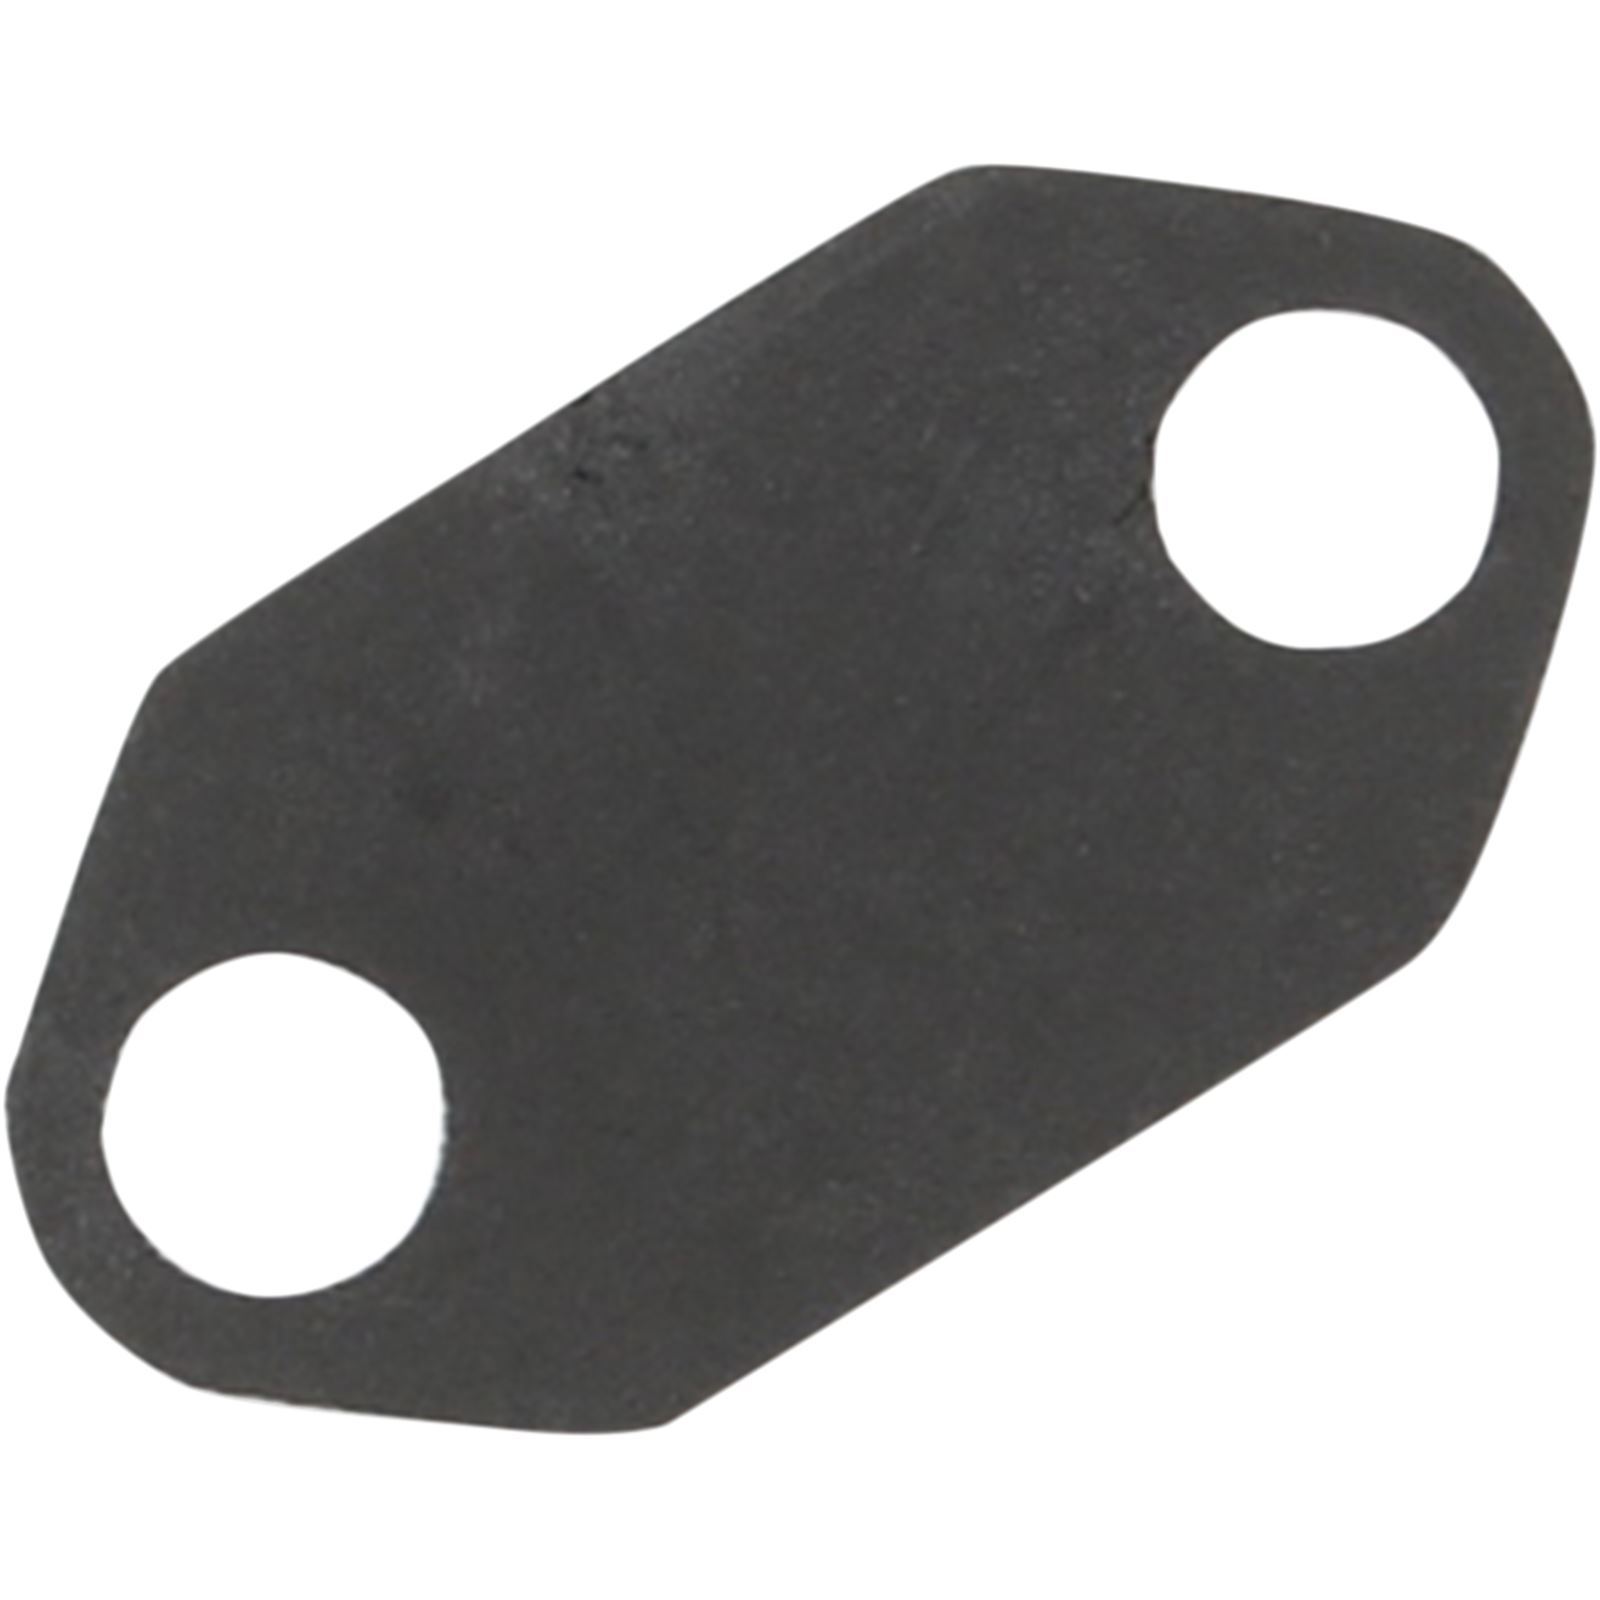 Cometic Inspection Cover Gasket - 34763-02